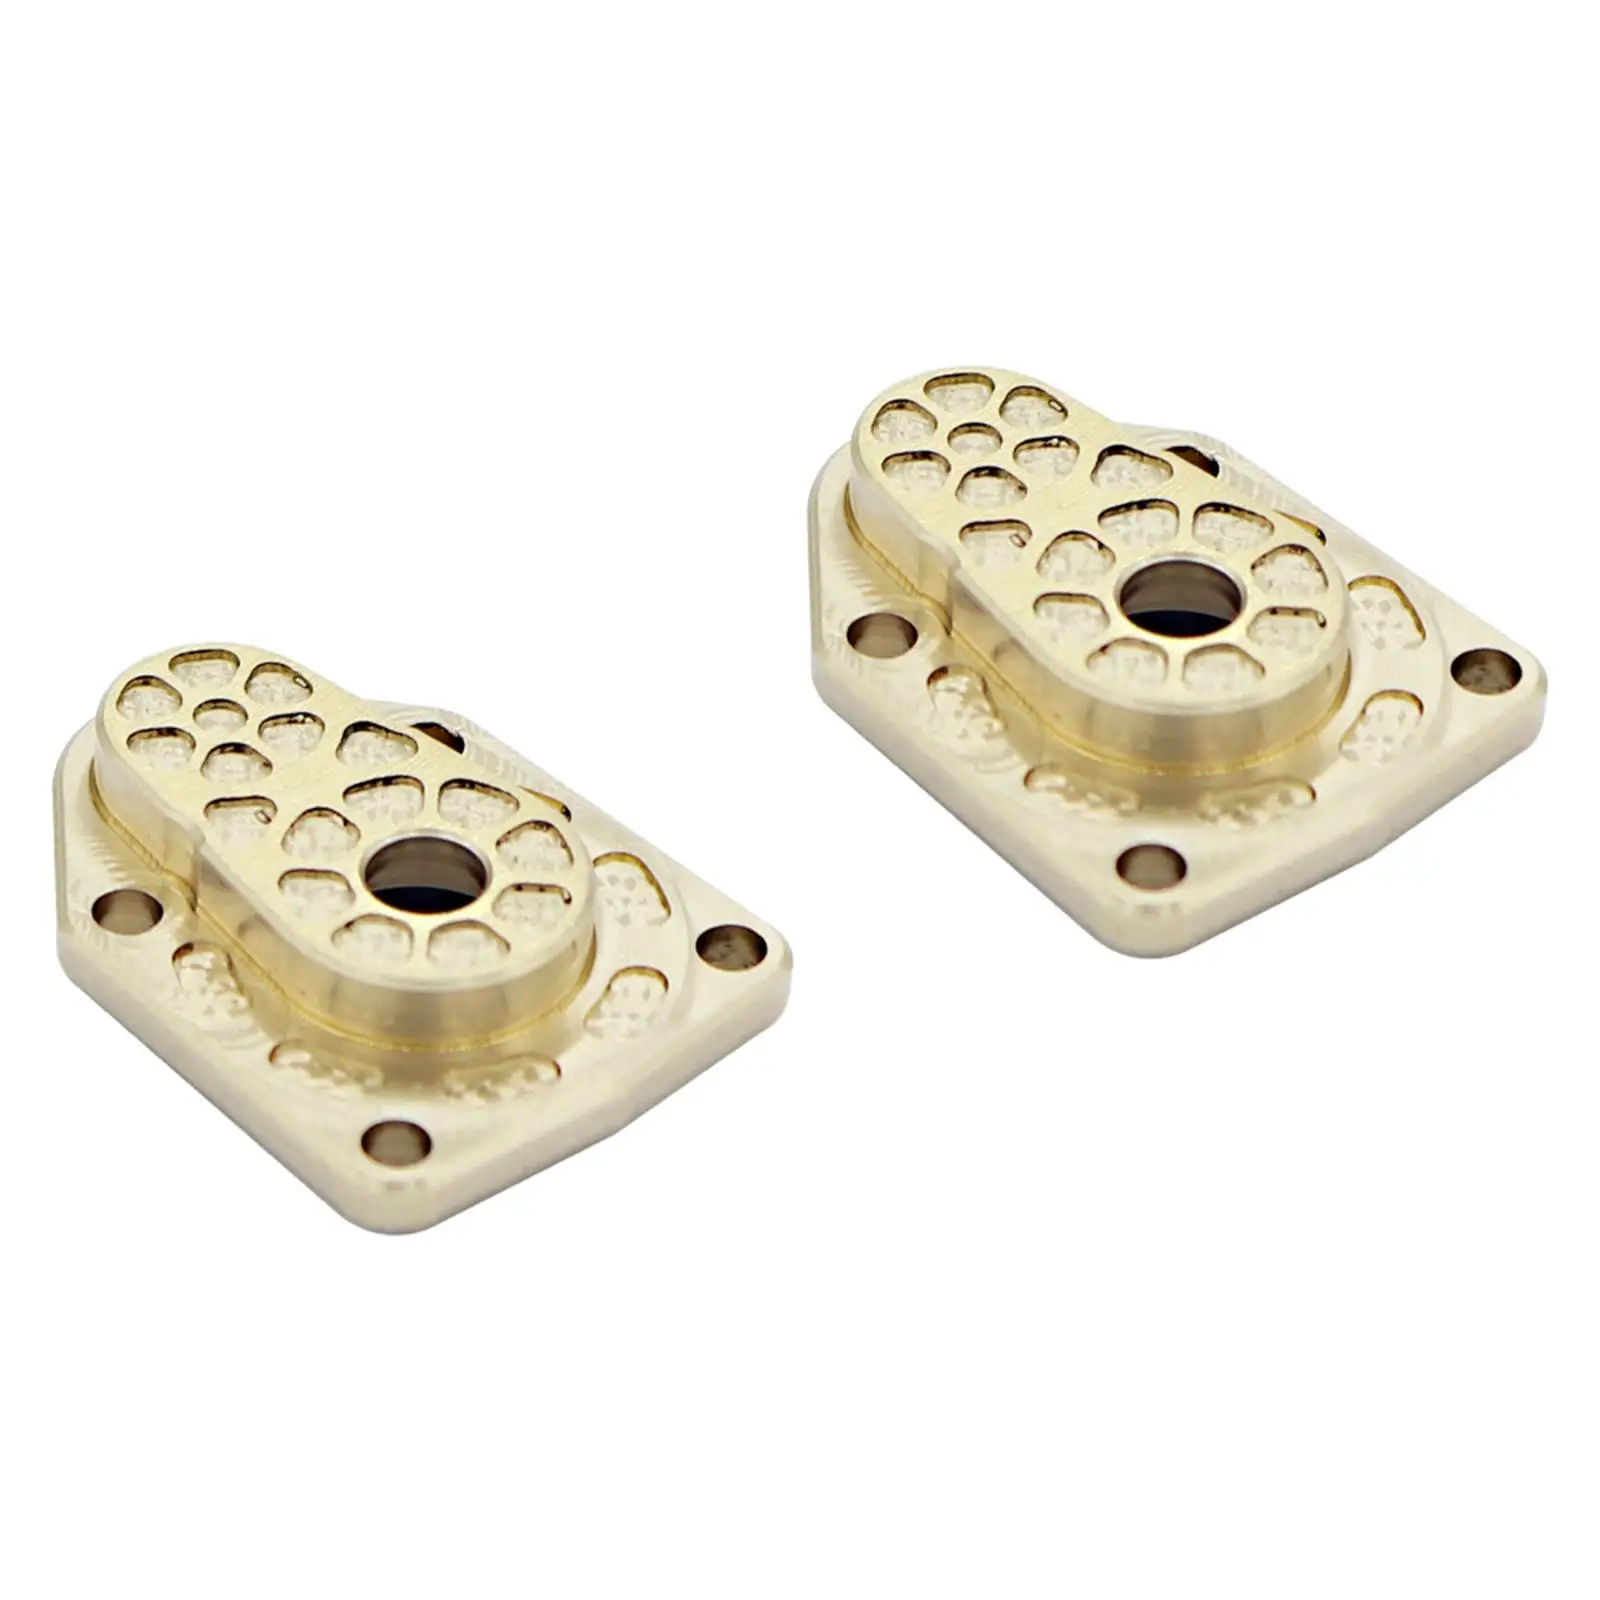 2x Housing Cover RC Brass upgrage Cover for 1/18 RC Crawler Car DIY Modified